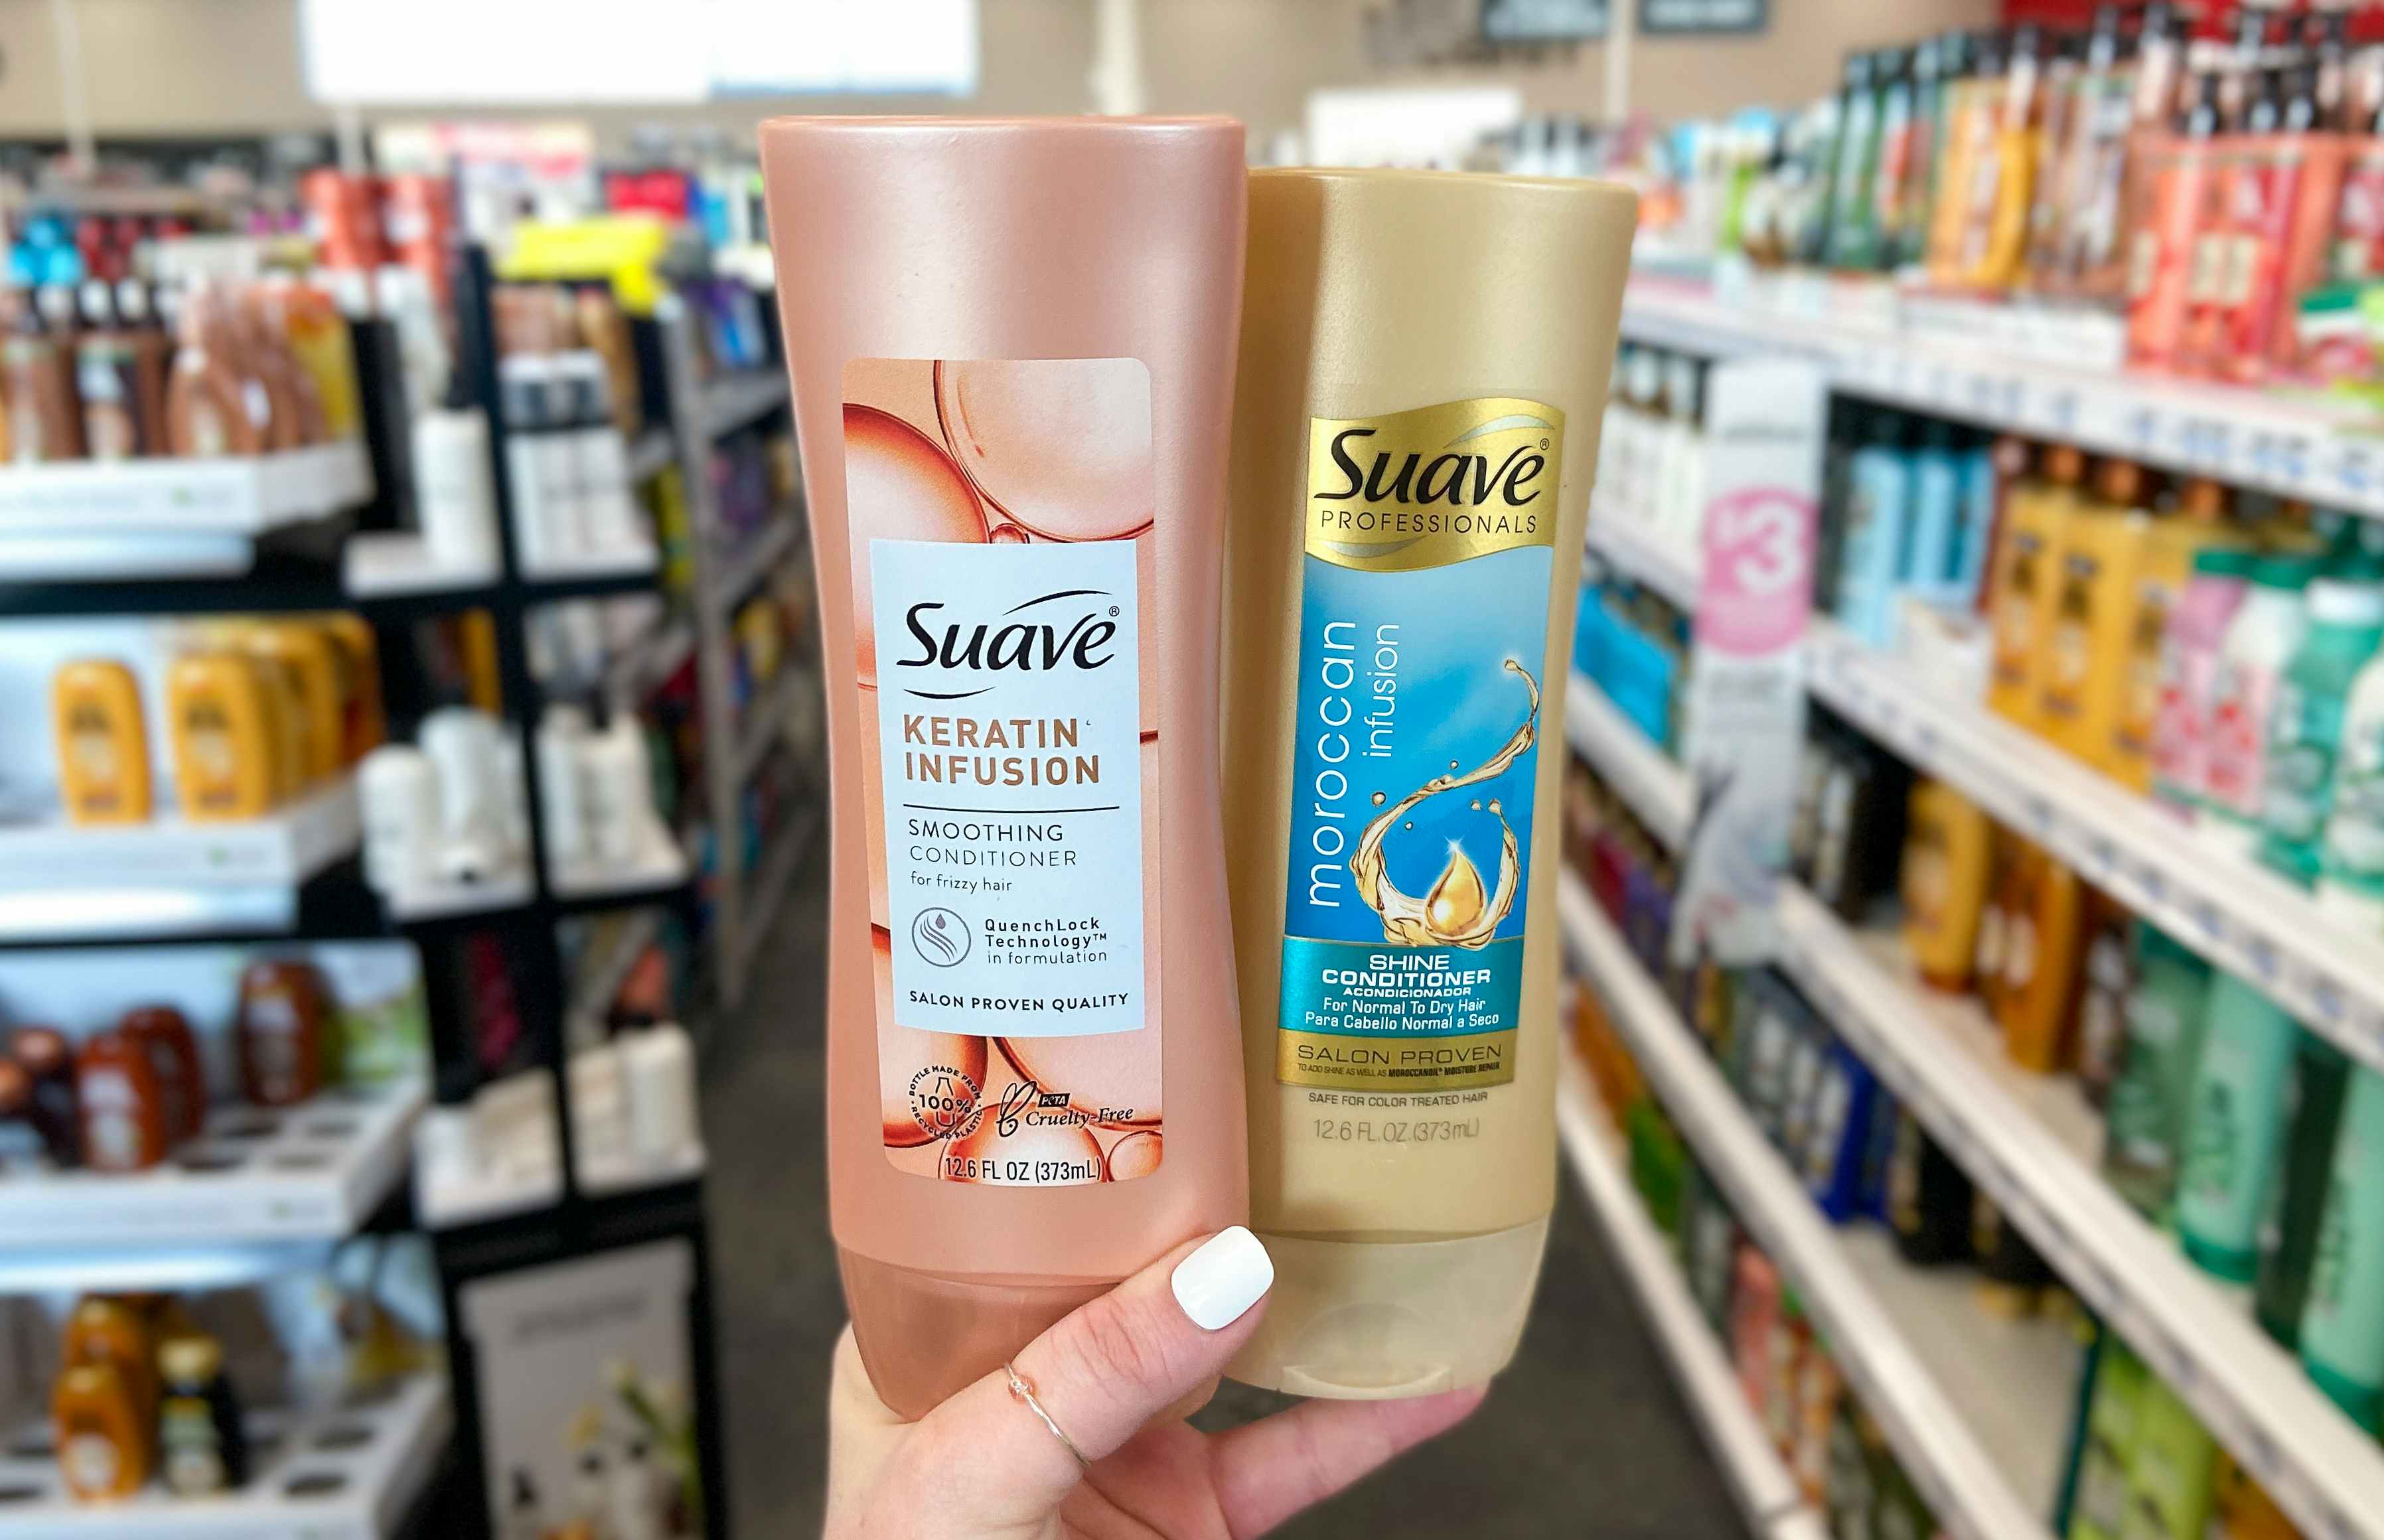 A person's hand holding up two bottles of Suave conditioner in front of an aisle in a store. One is Suave Keratin Infusion smoothing cond...